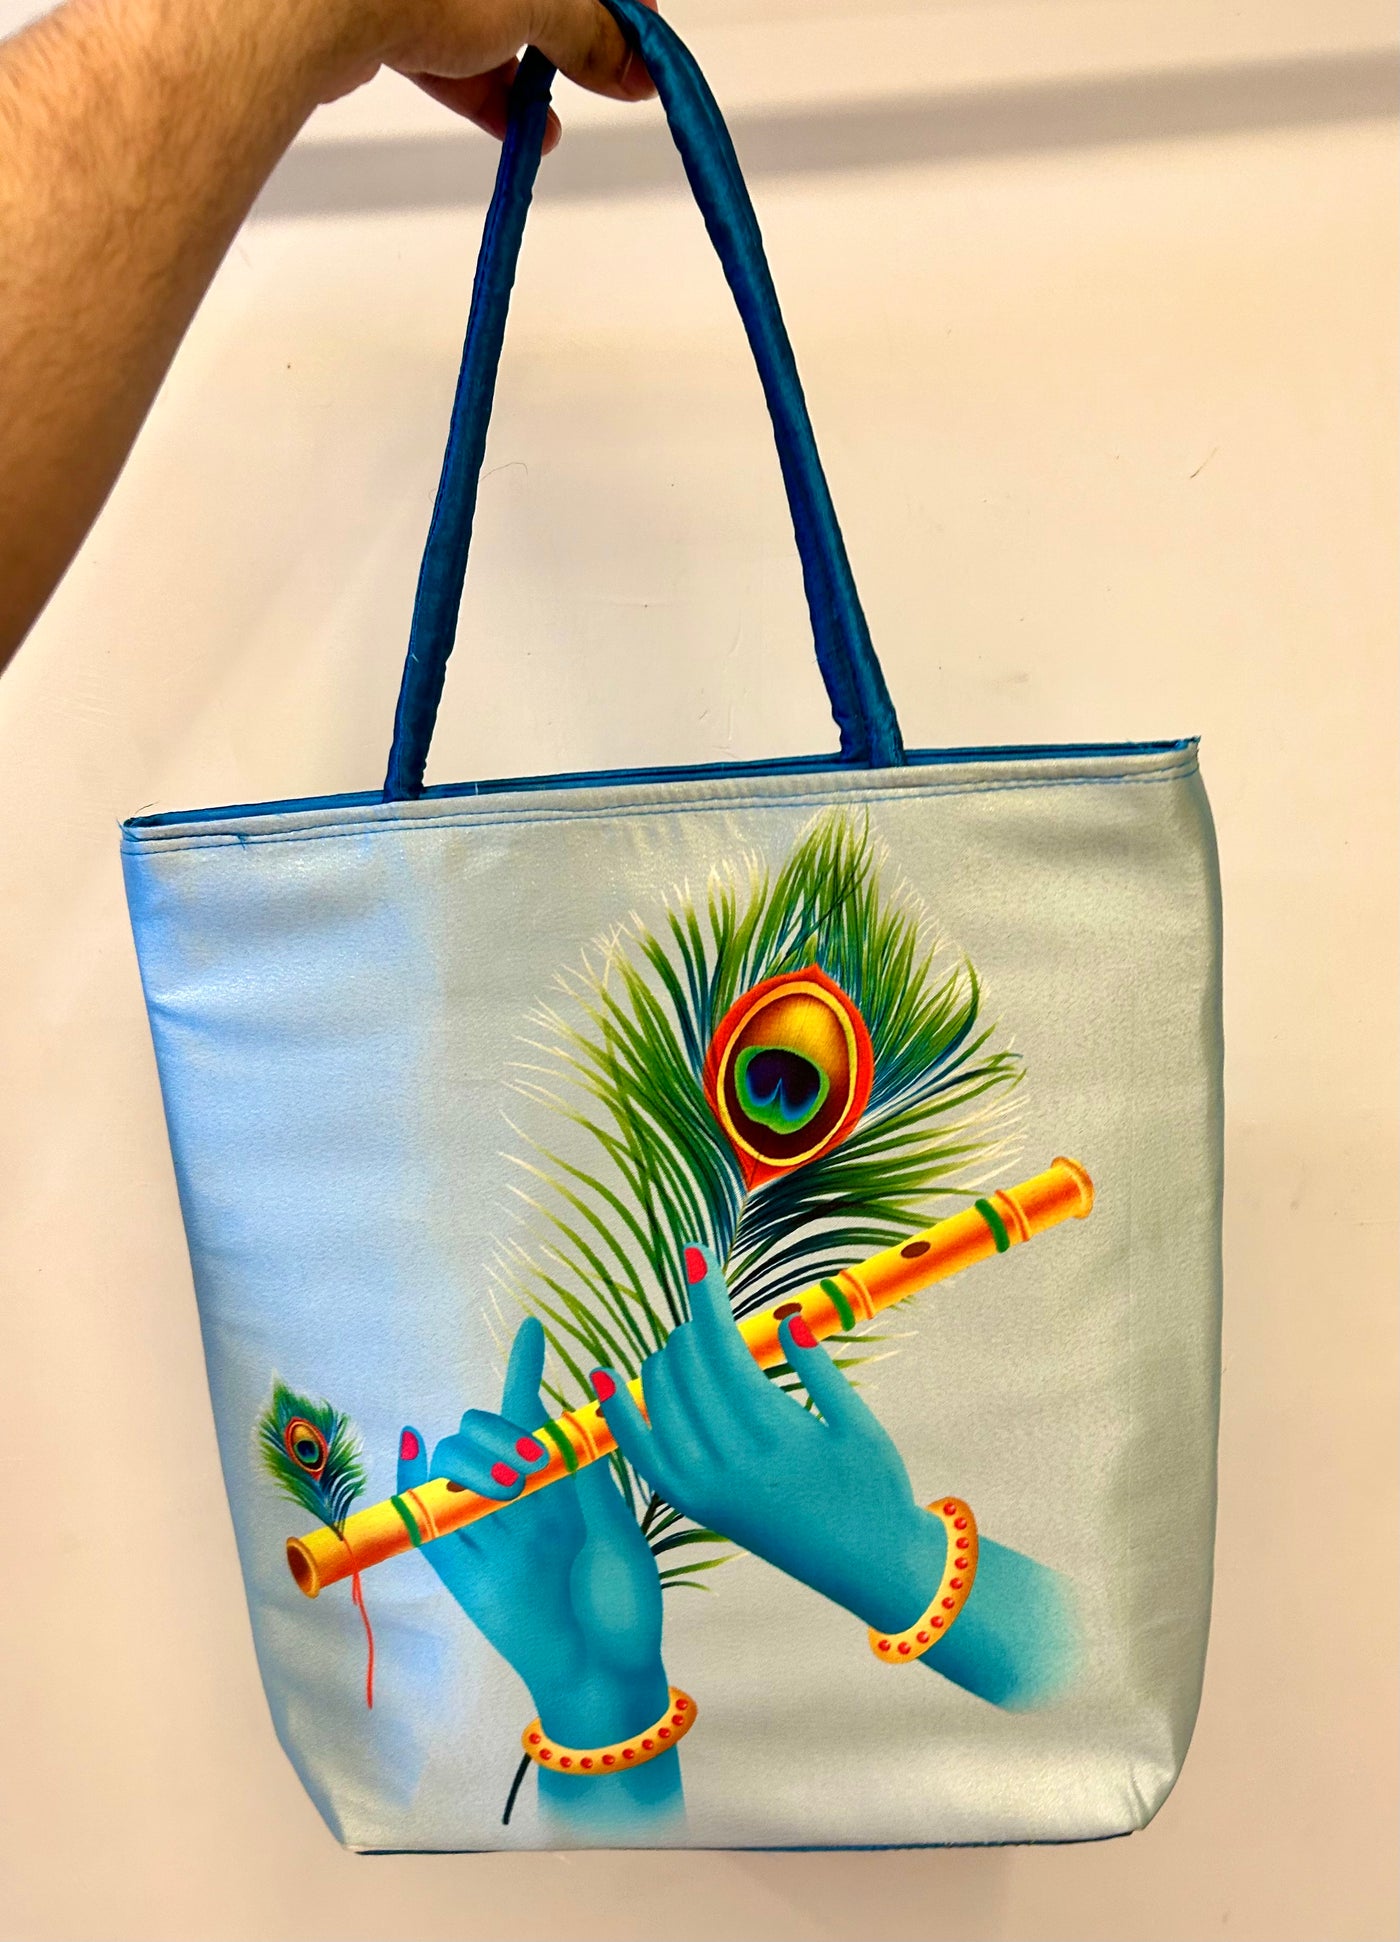 Kanha ji Mor pankh 🙏 printed Hand bags for packing return gifts 🎁 / Gift bags for favours for bridesmaids in pooja haldi Mehendi & festivals (16*16 inch)